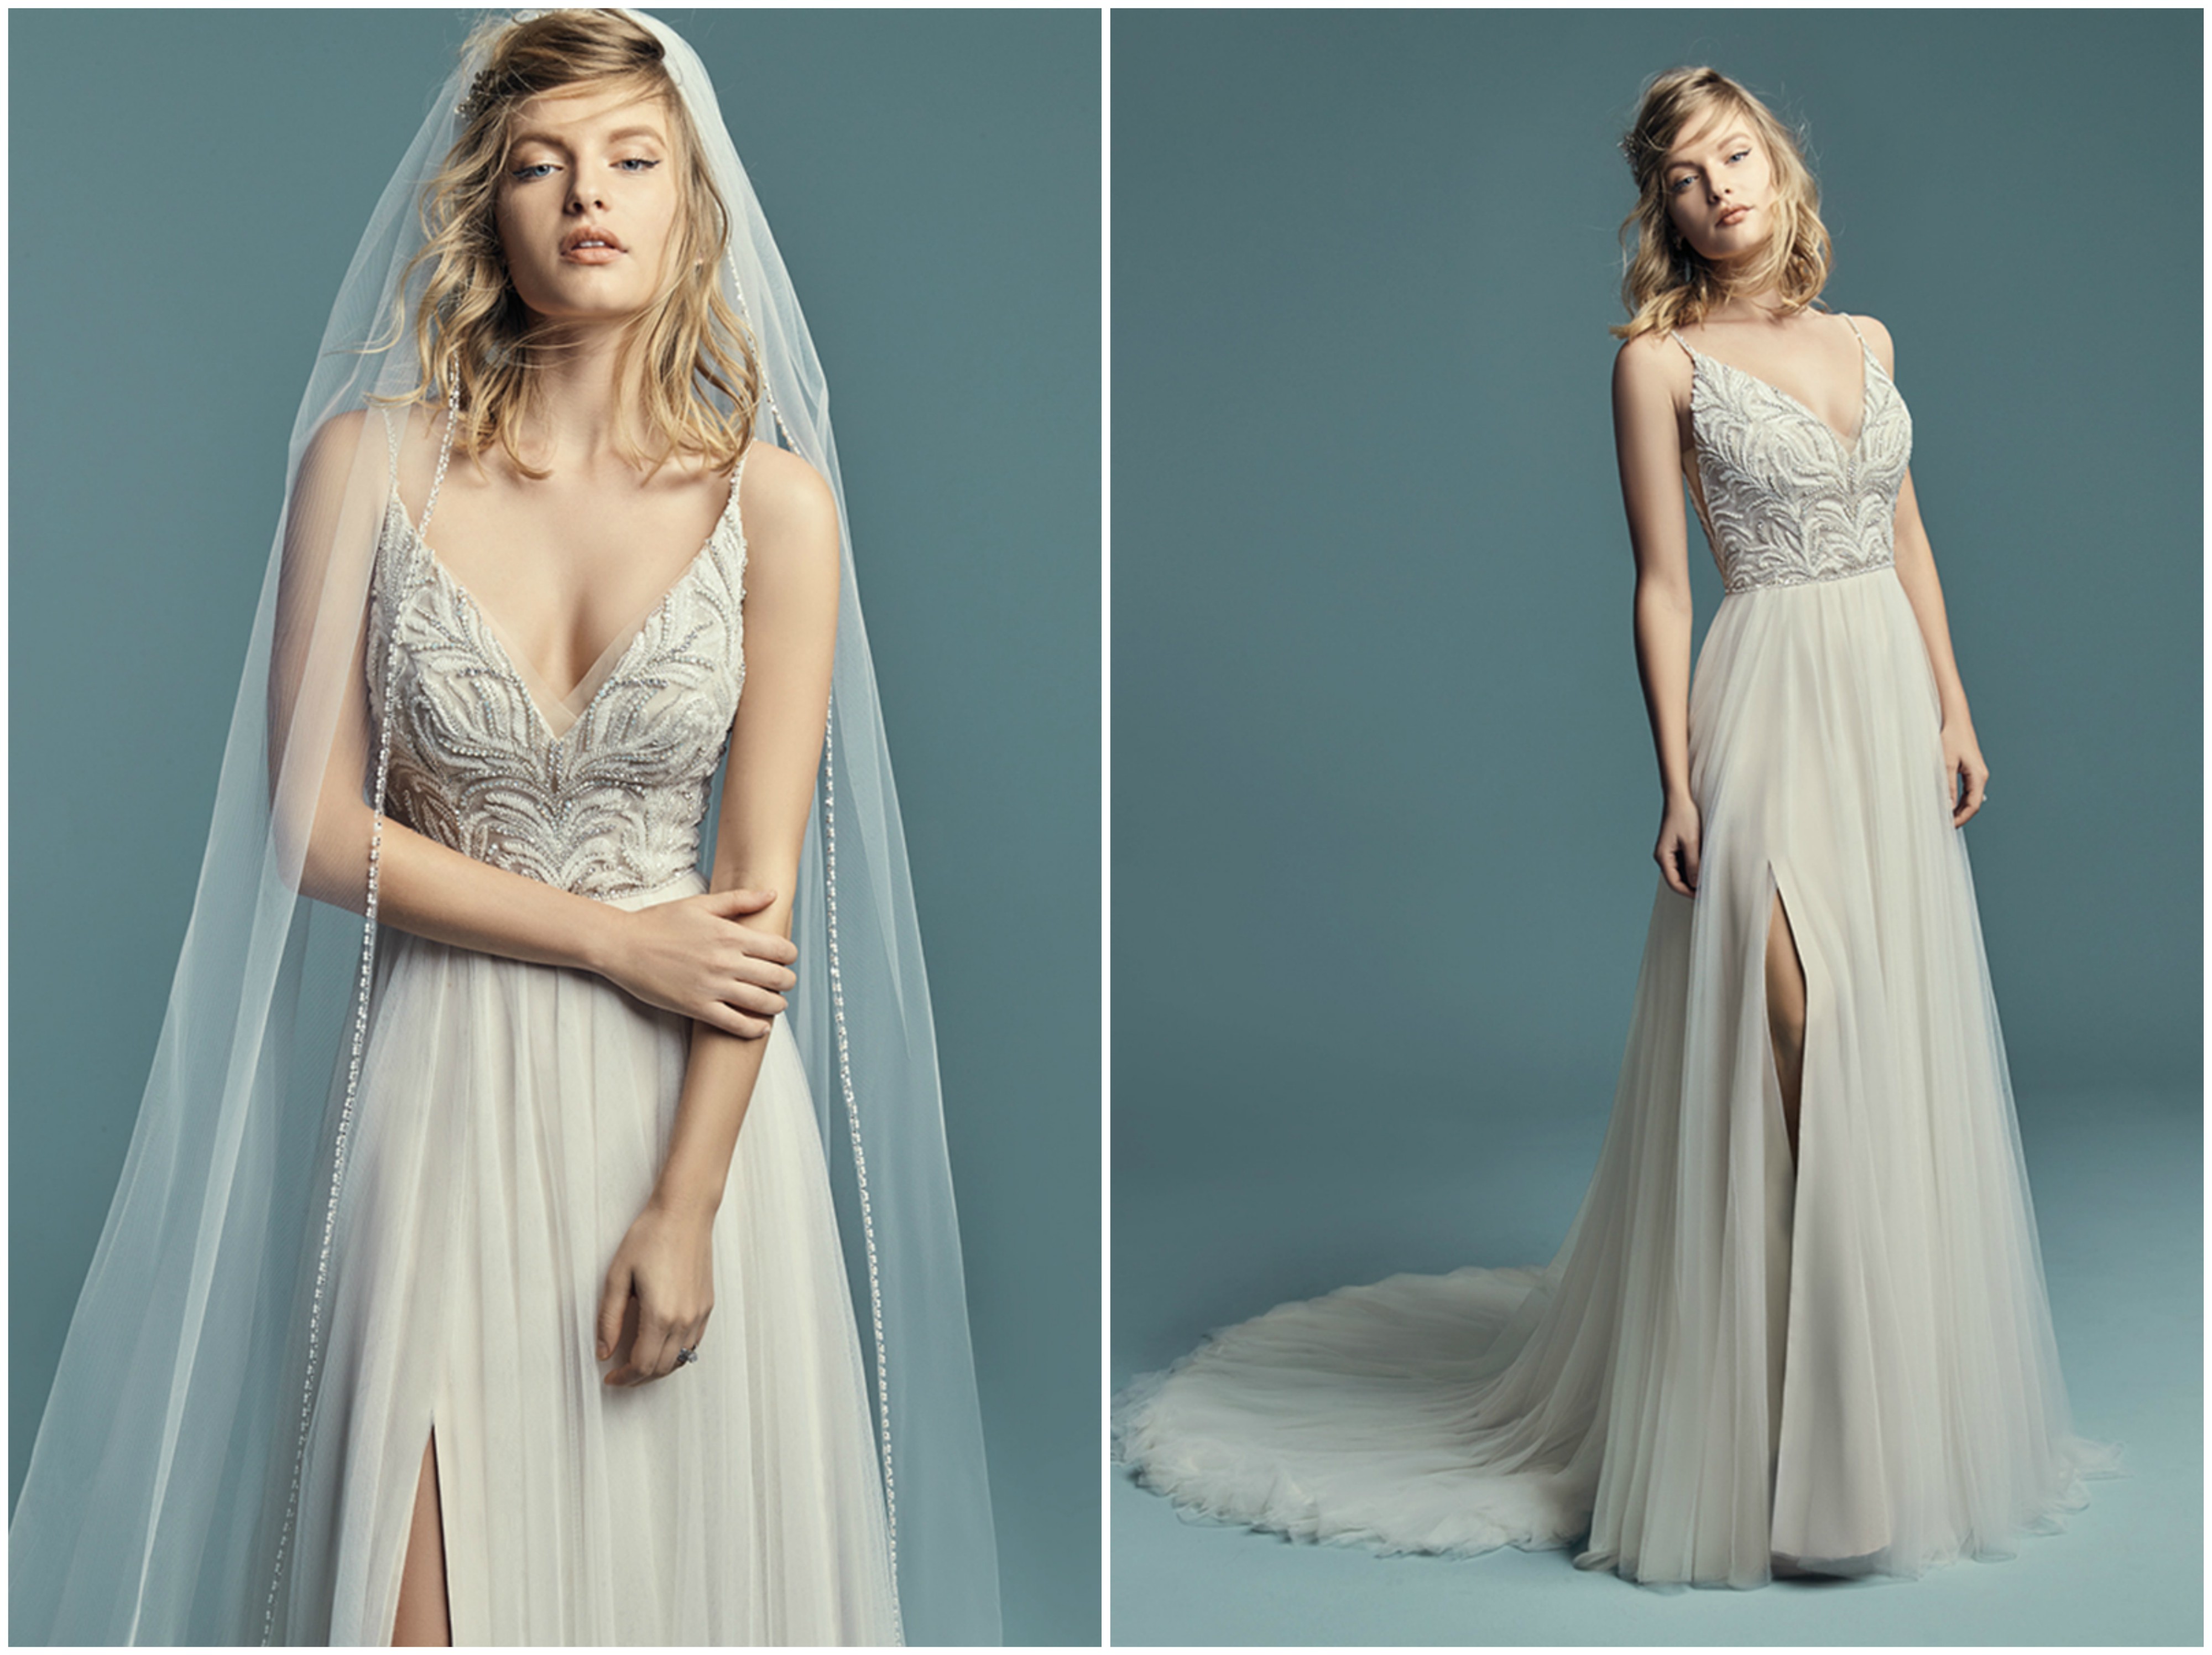 <a href="https://www.maggiesottero.com/maggie-sottero/charlene/11275" target="_blank">Maggie Sottero</a>